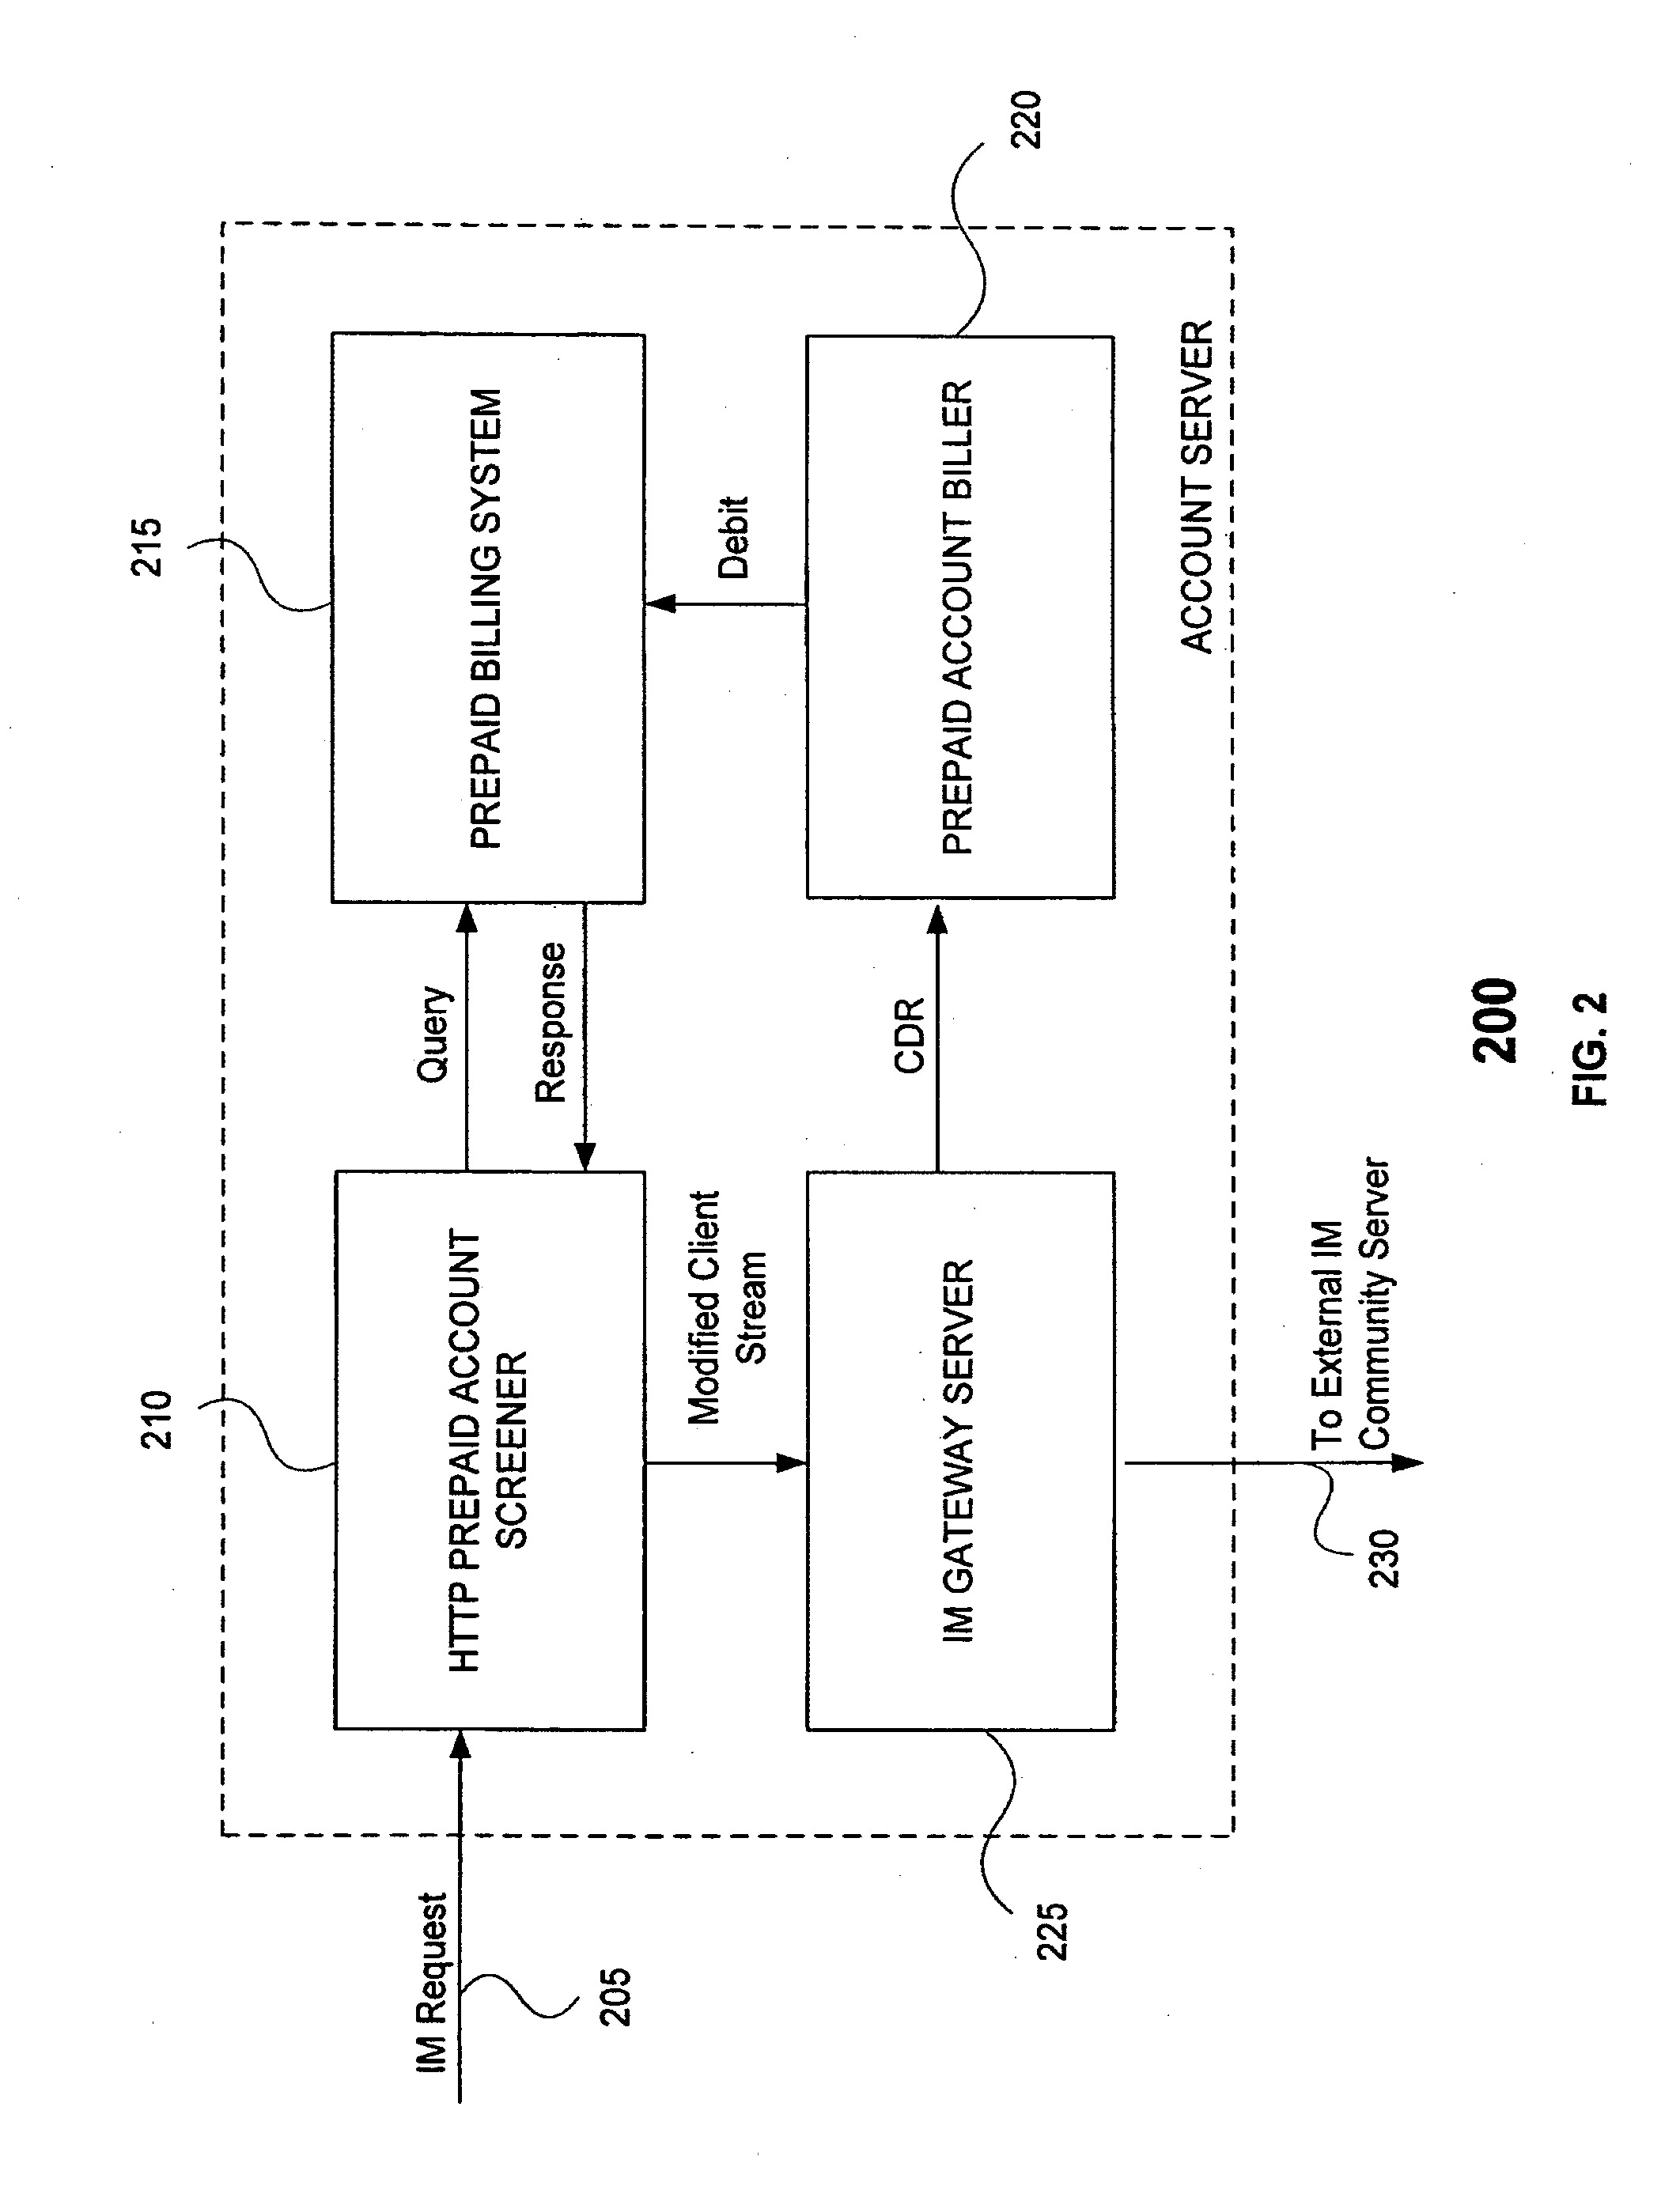 System and Method for Providing Prepaid Billing For Instant Messaging Users